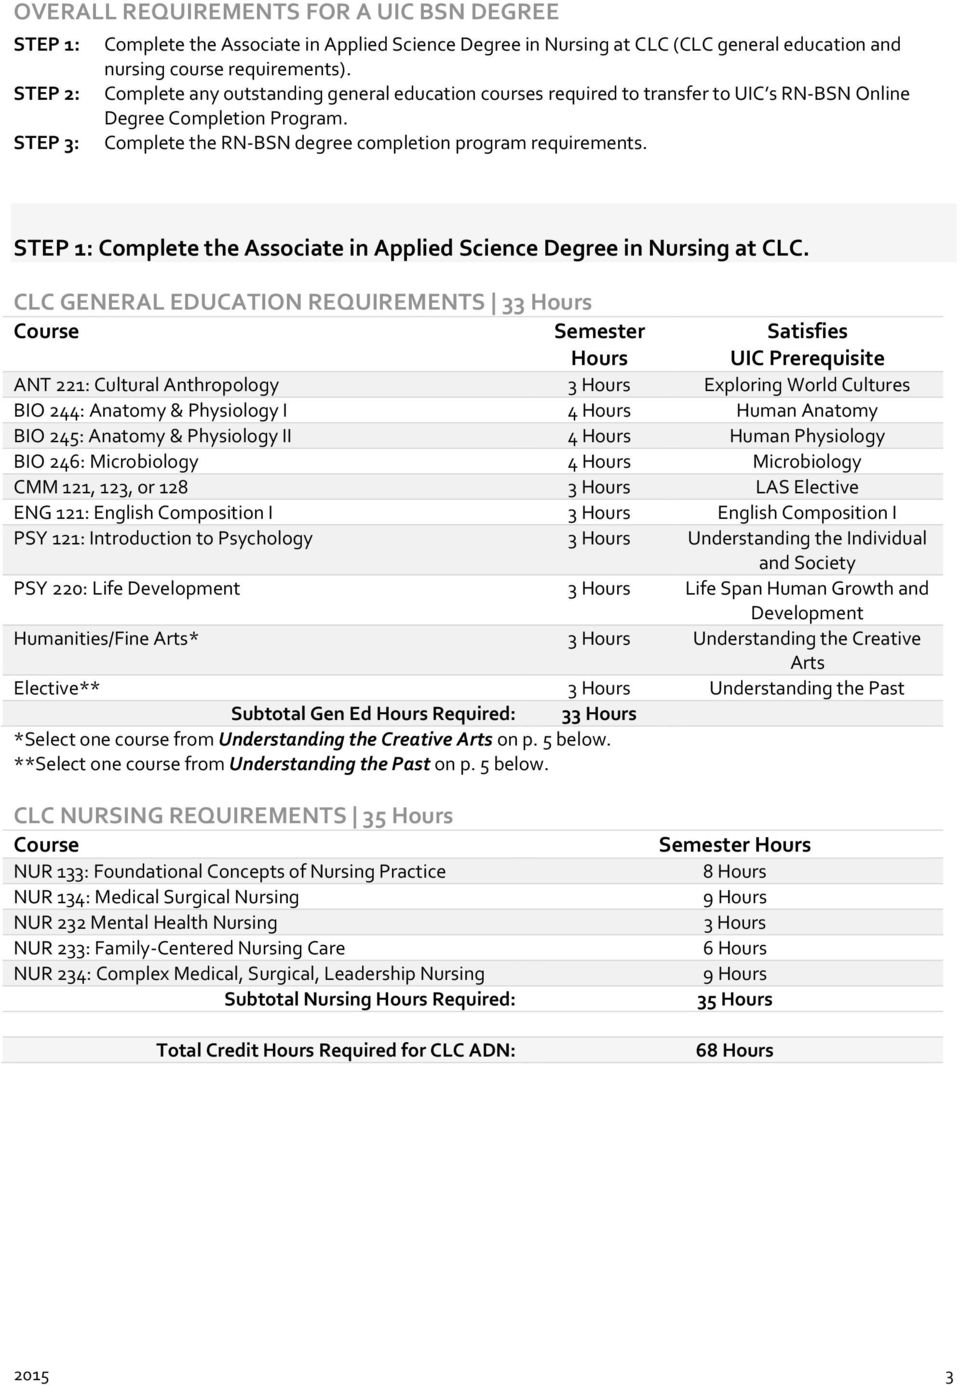 STEP 1: Complete the Associate in Applied Science Degree in Nursing at CLC.